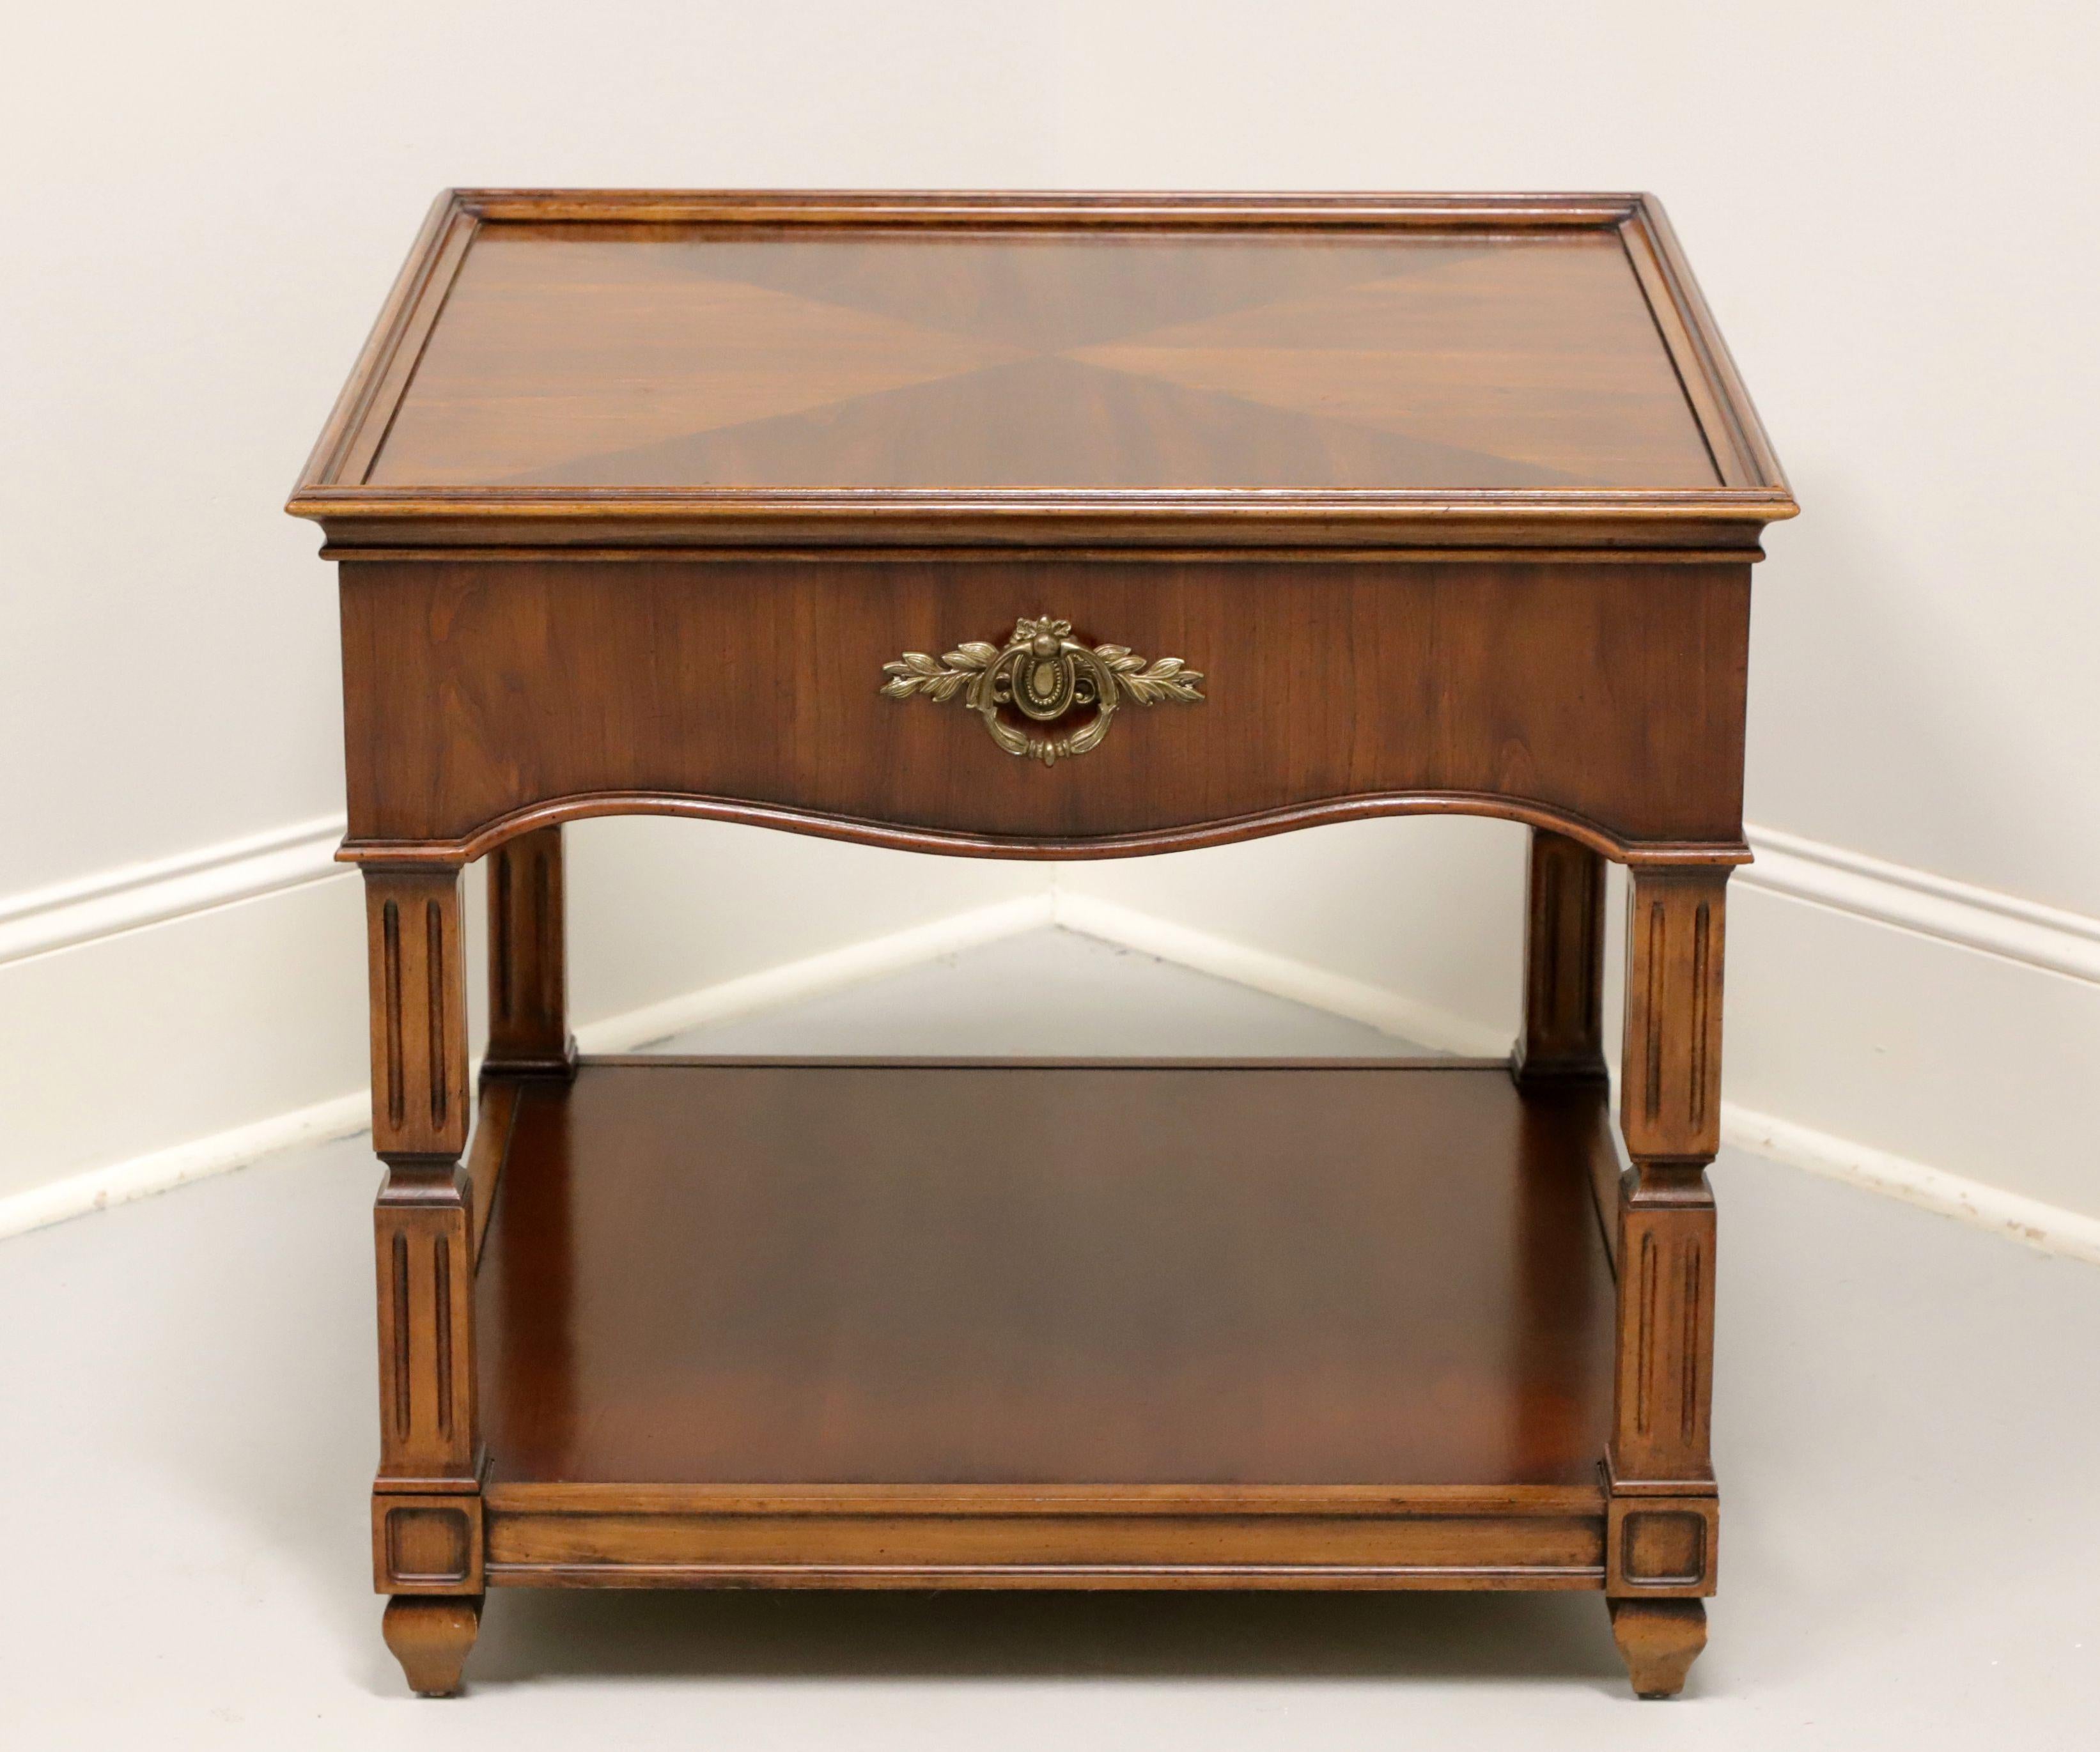 A French influenced square side table by Thomasville. Cherry wood with inlaid triangle parquetry design & low picture frame gallery edge to top, carved apron with brass handle to front side, a lower tier shelf, column-like legs, and spade feet. Made